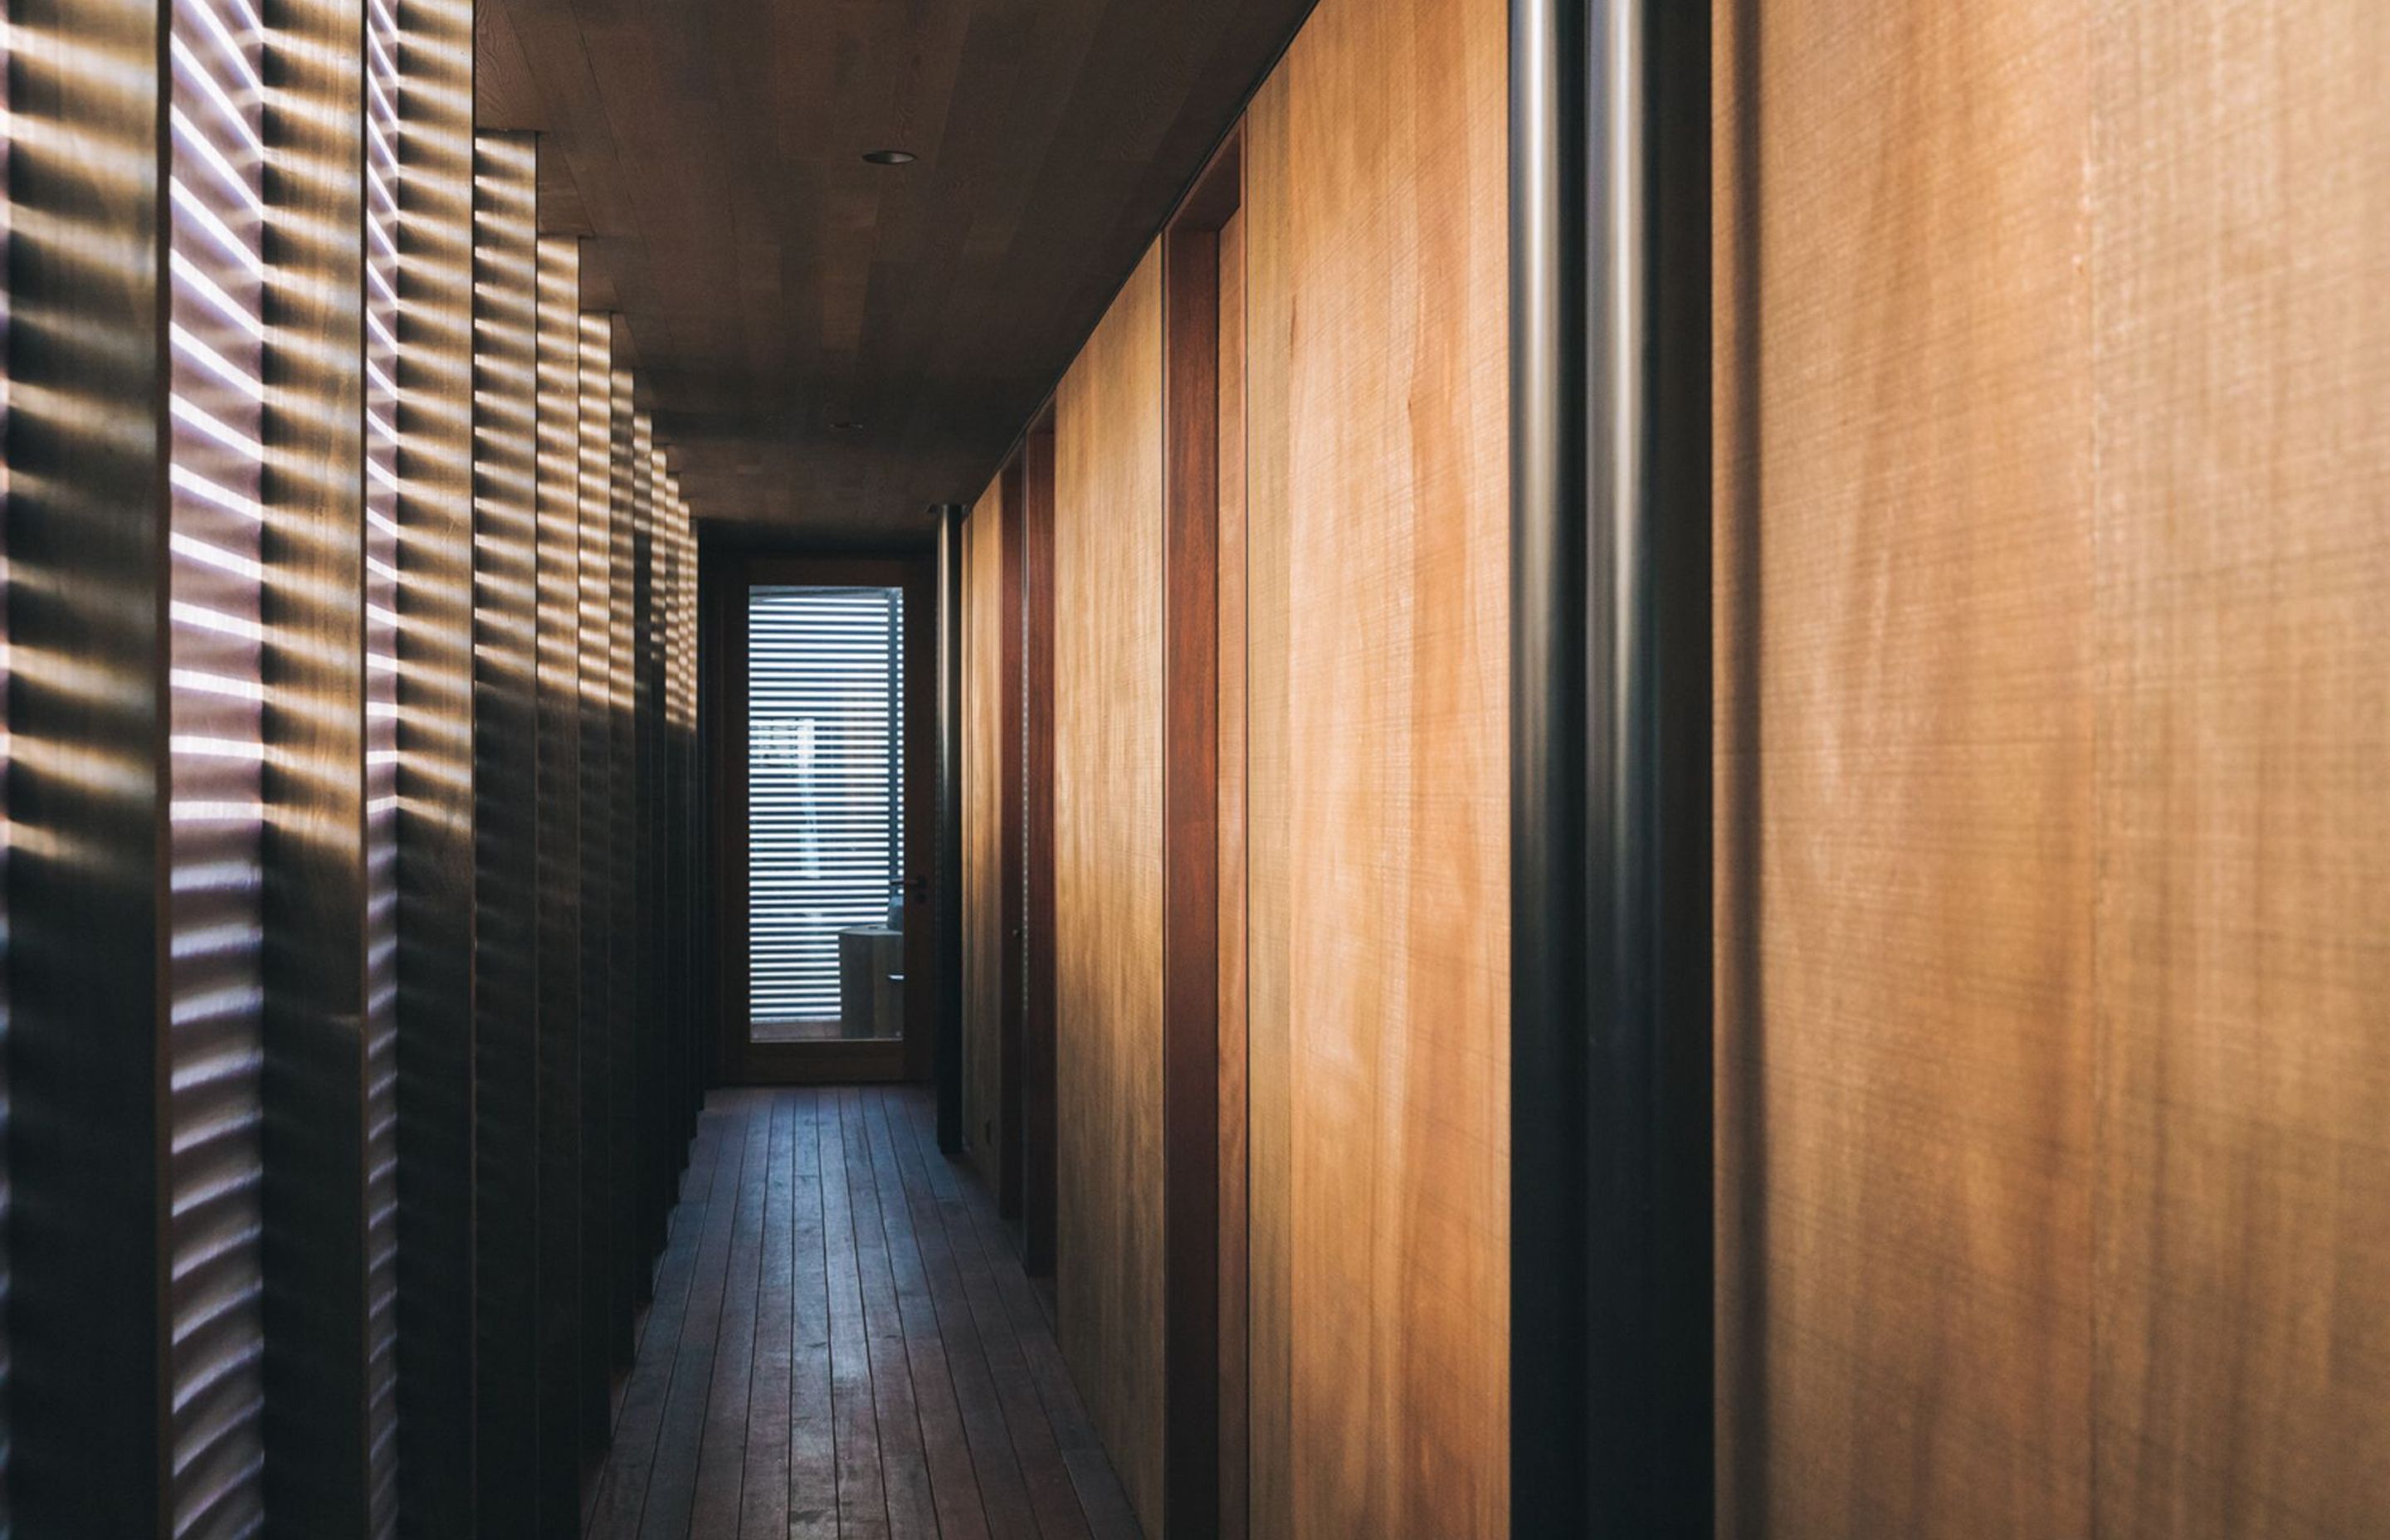 The internal hallway is actually classed as an outdoor space, with flooring of kwila decking and a simple perspex wall with cedar batons running across it. 